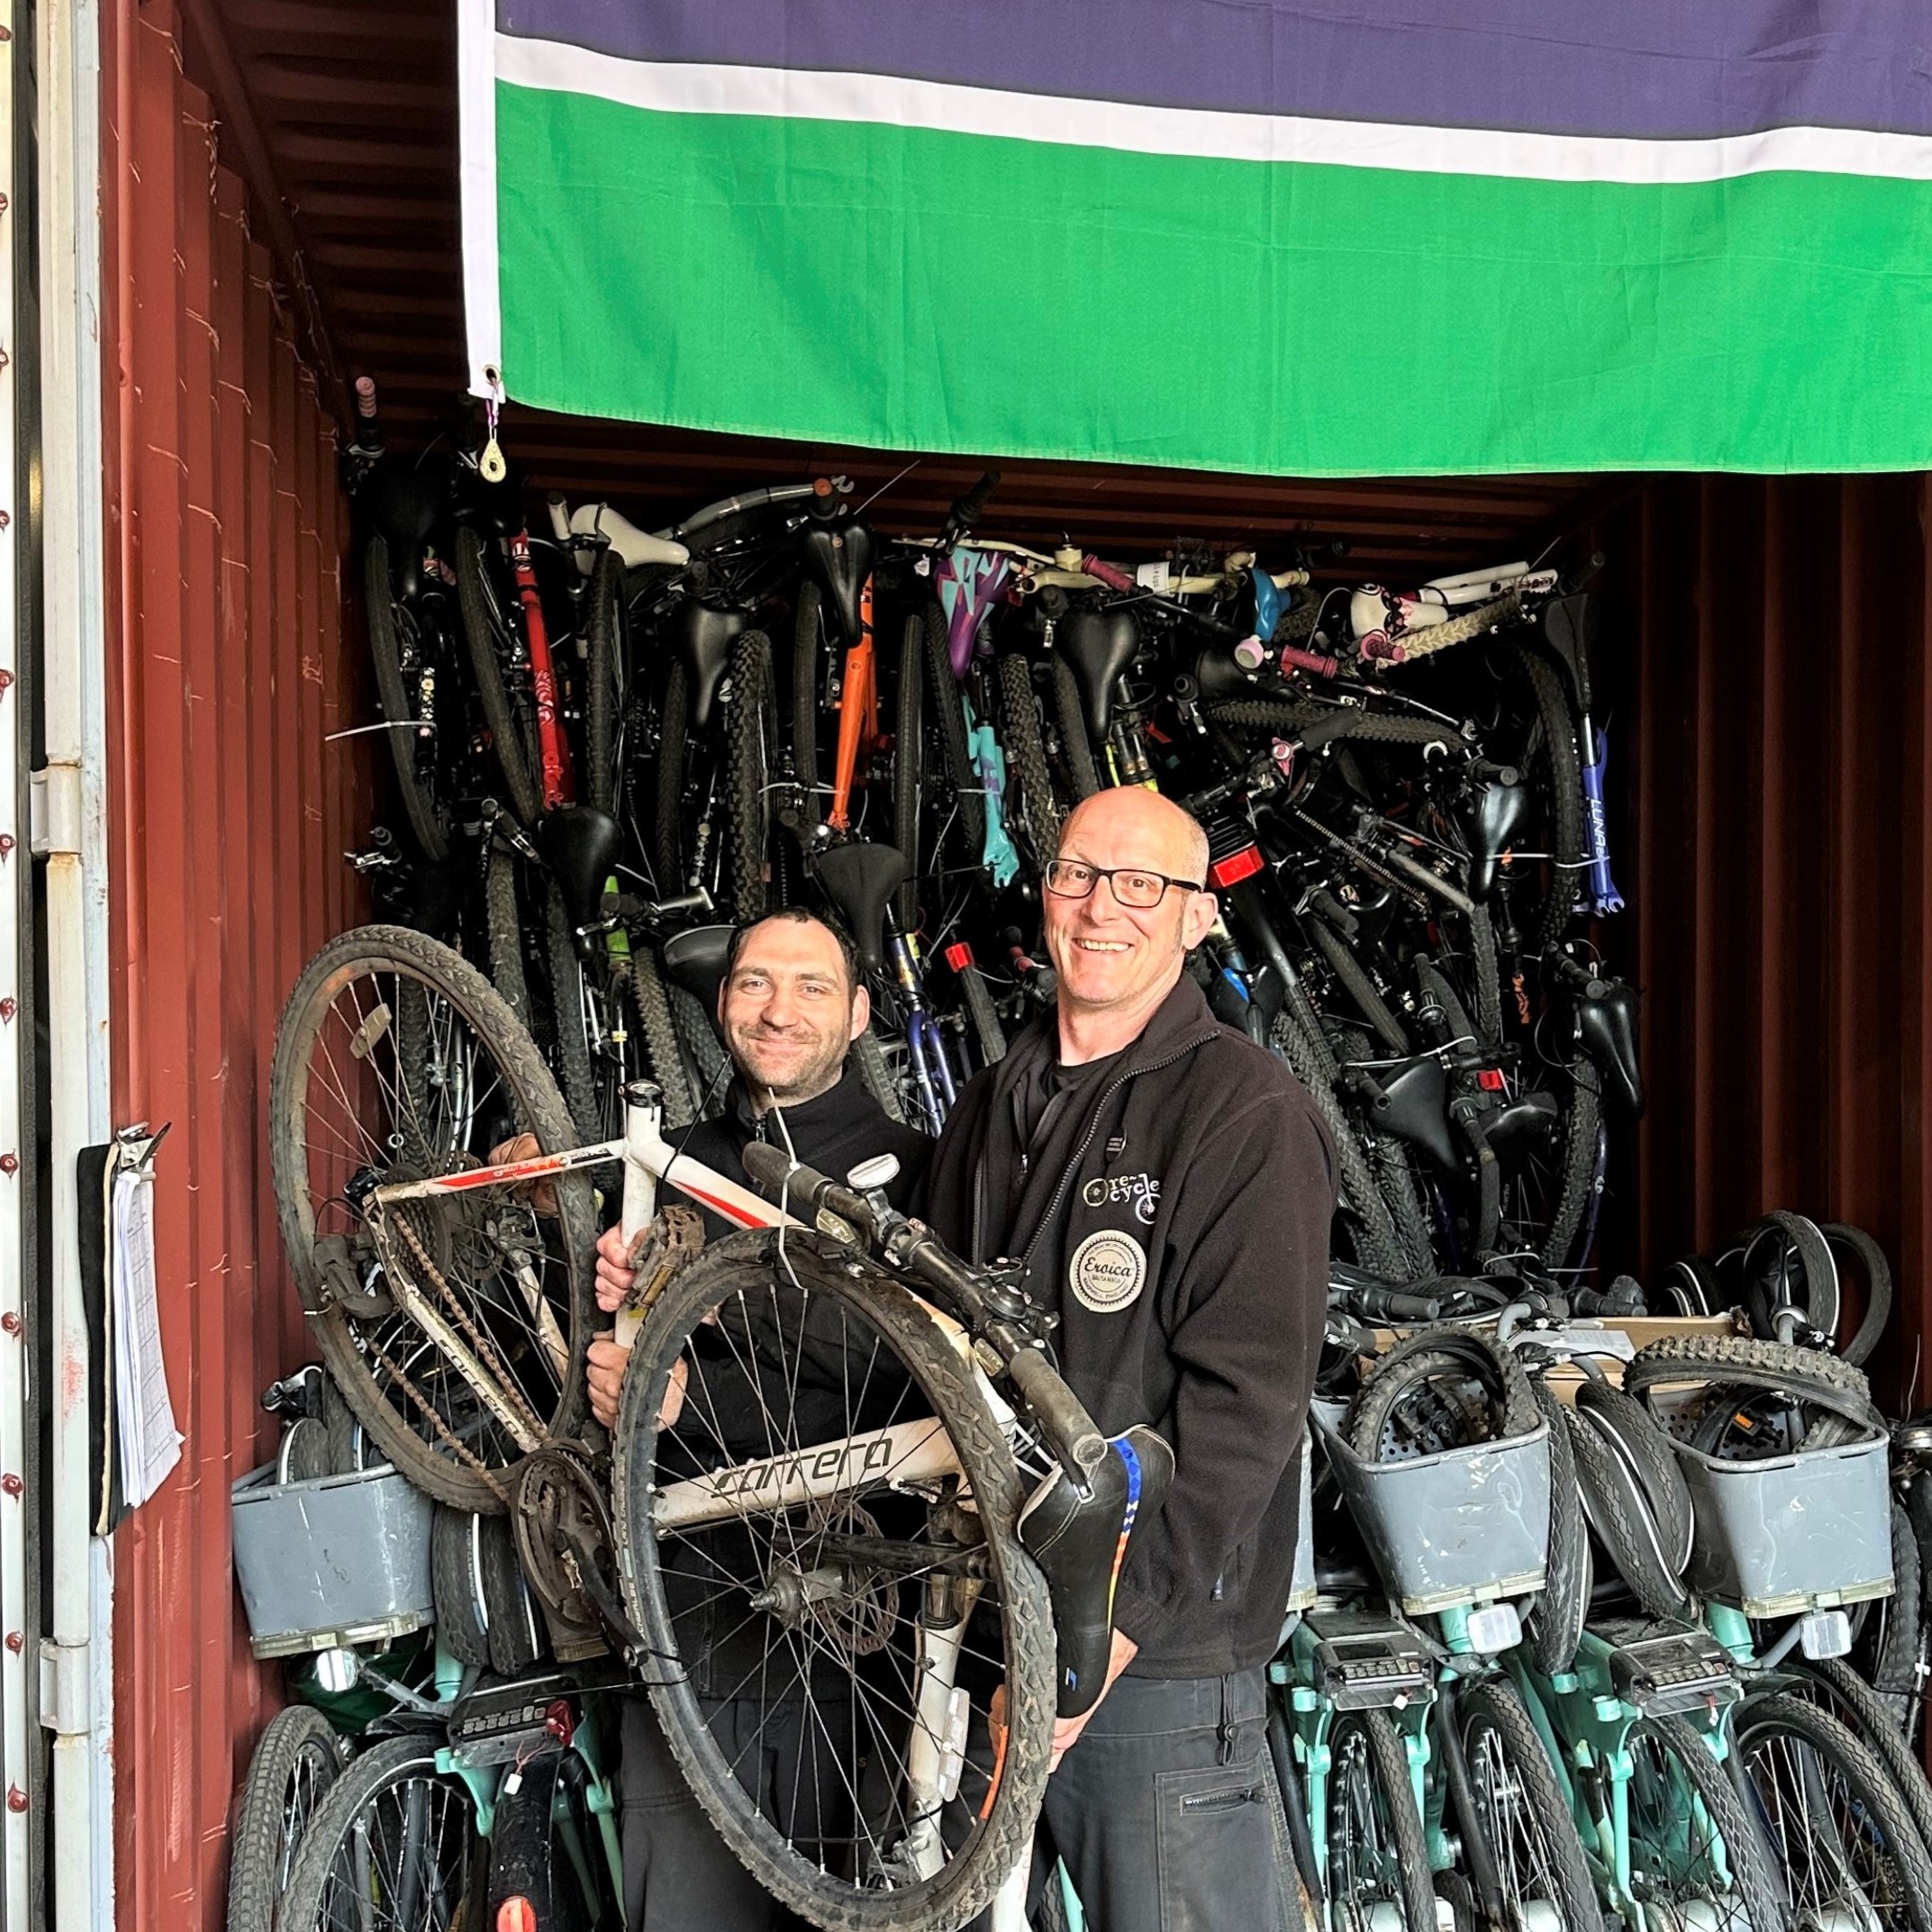 Ryan and Mark warehouse manager at Re-Cycle The Gambia Bike